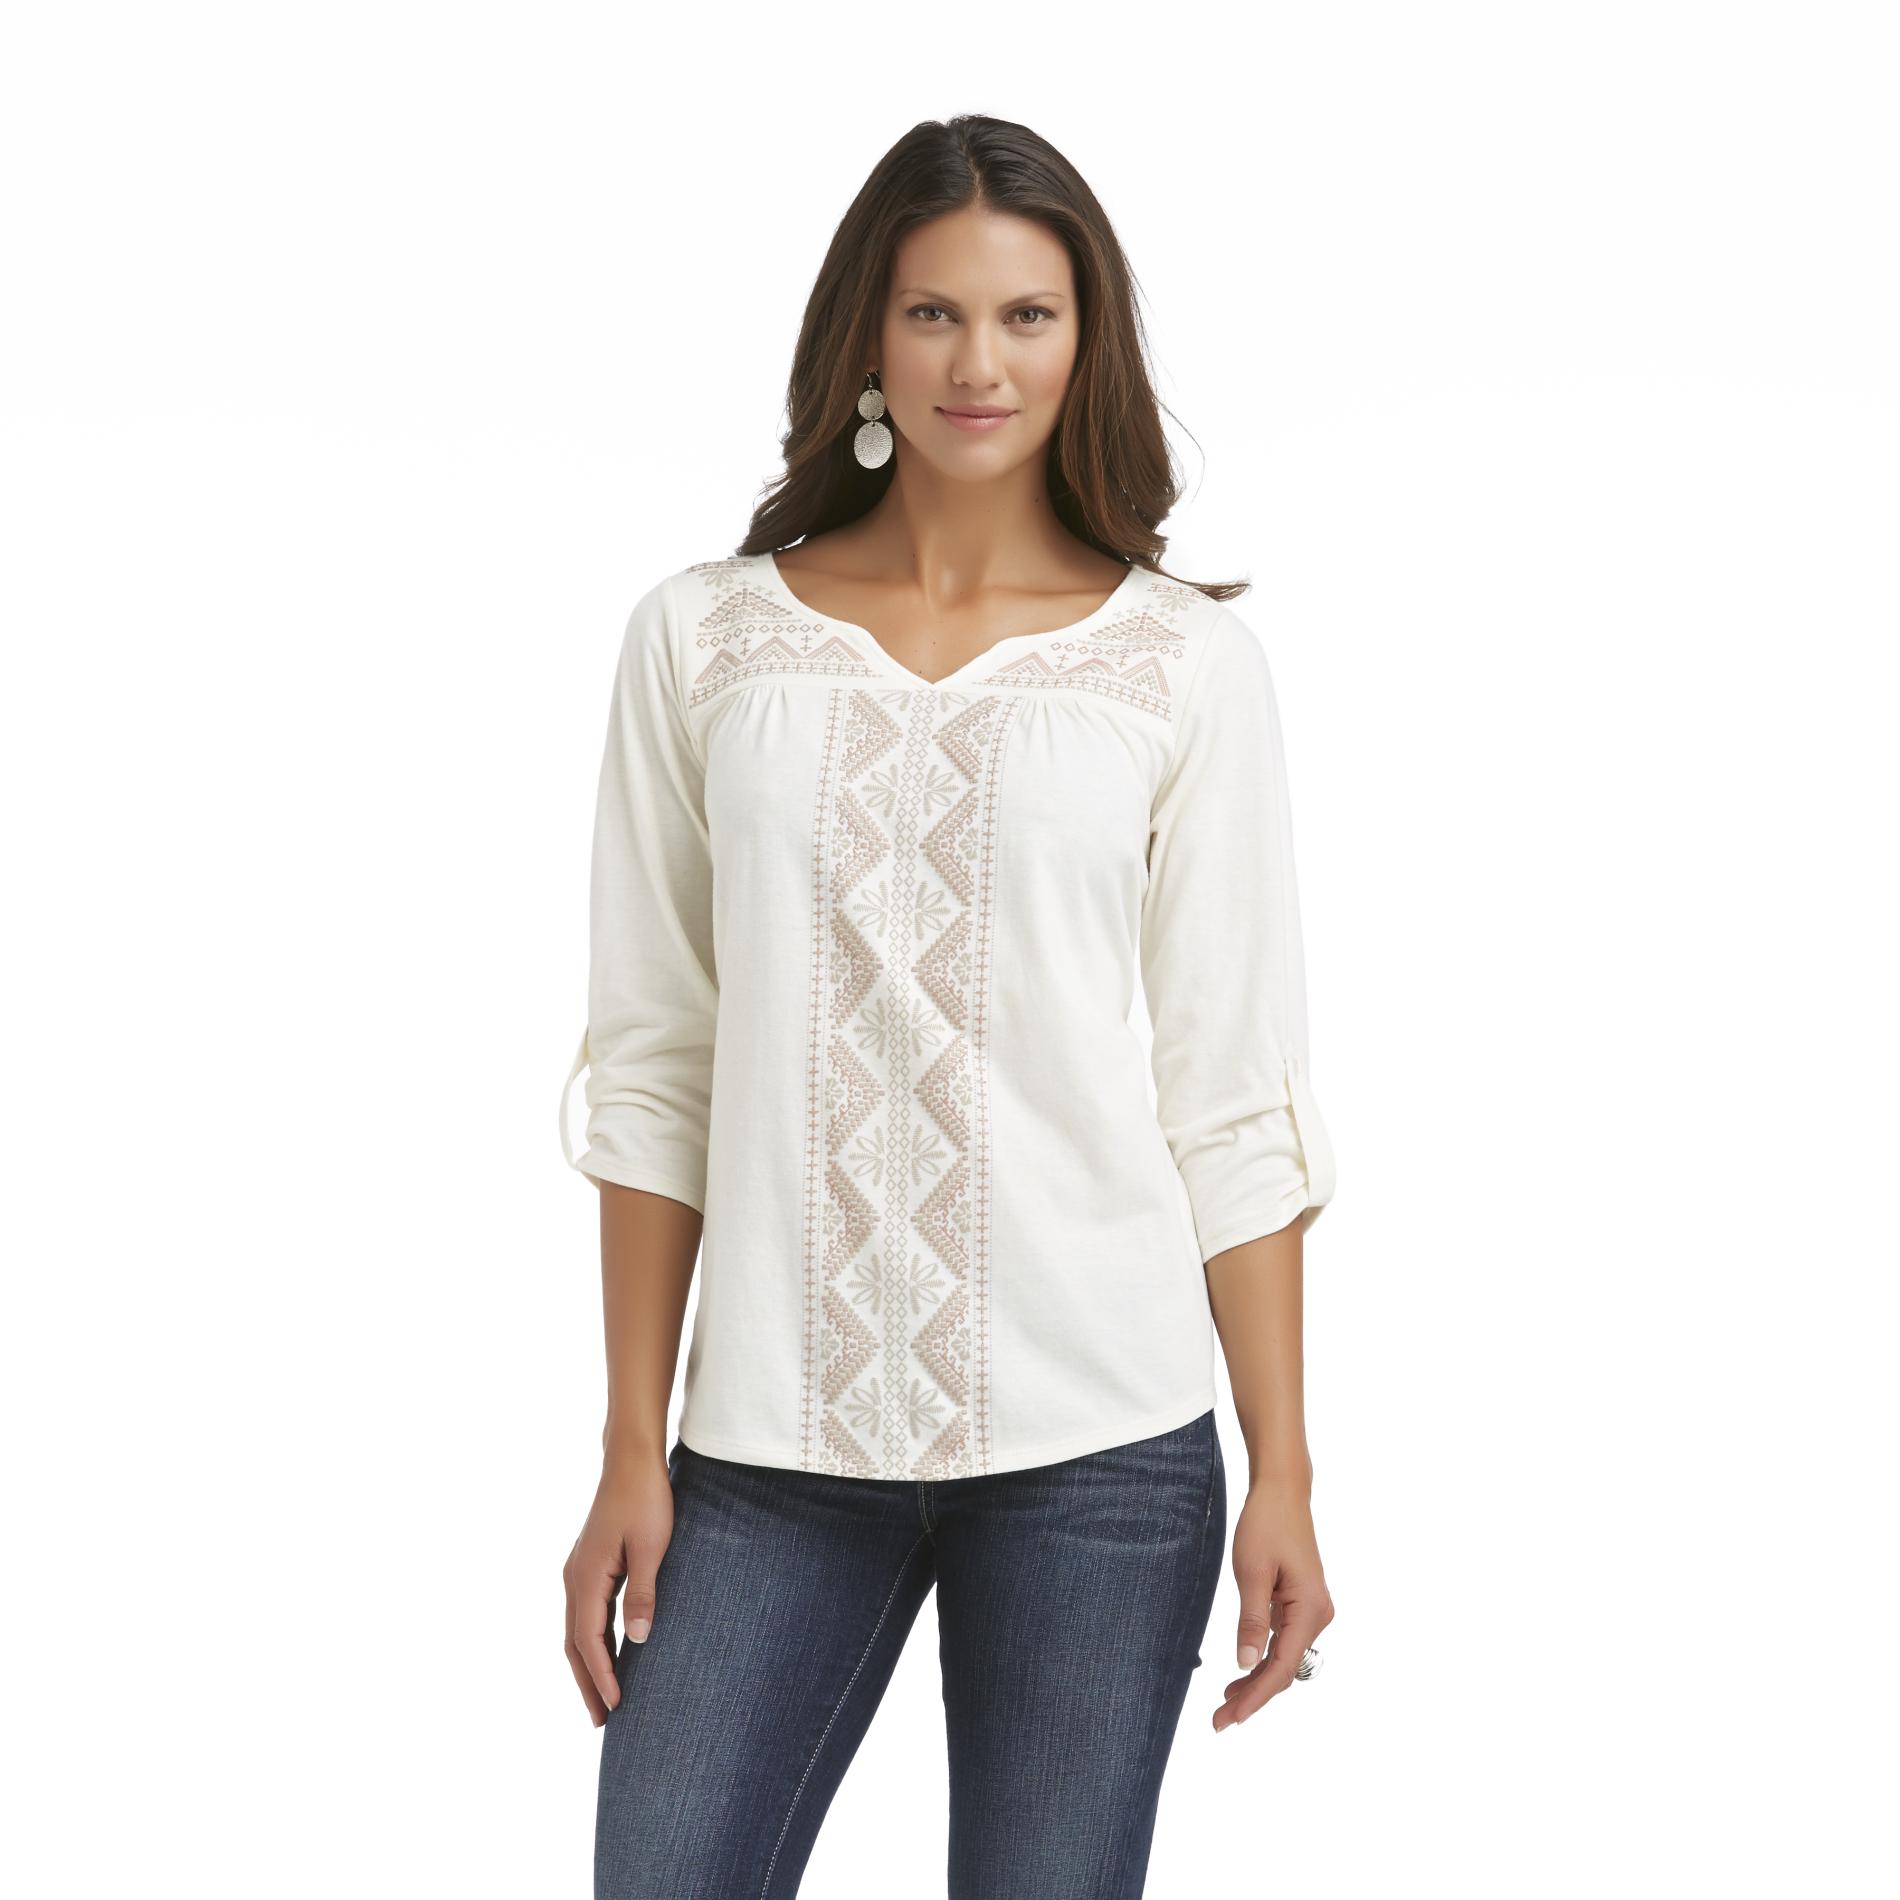 Canyon River Blues Women's Notched-Neck Top - Tribal